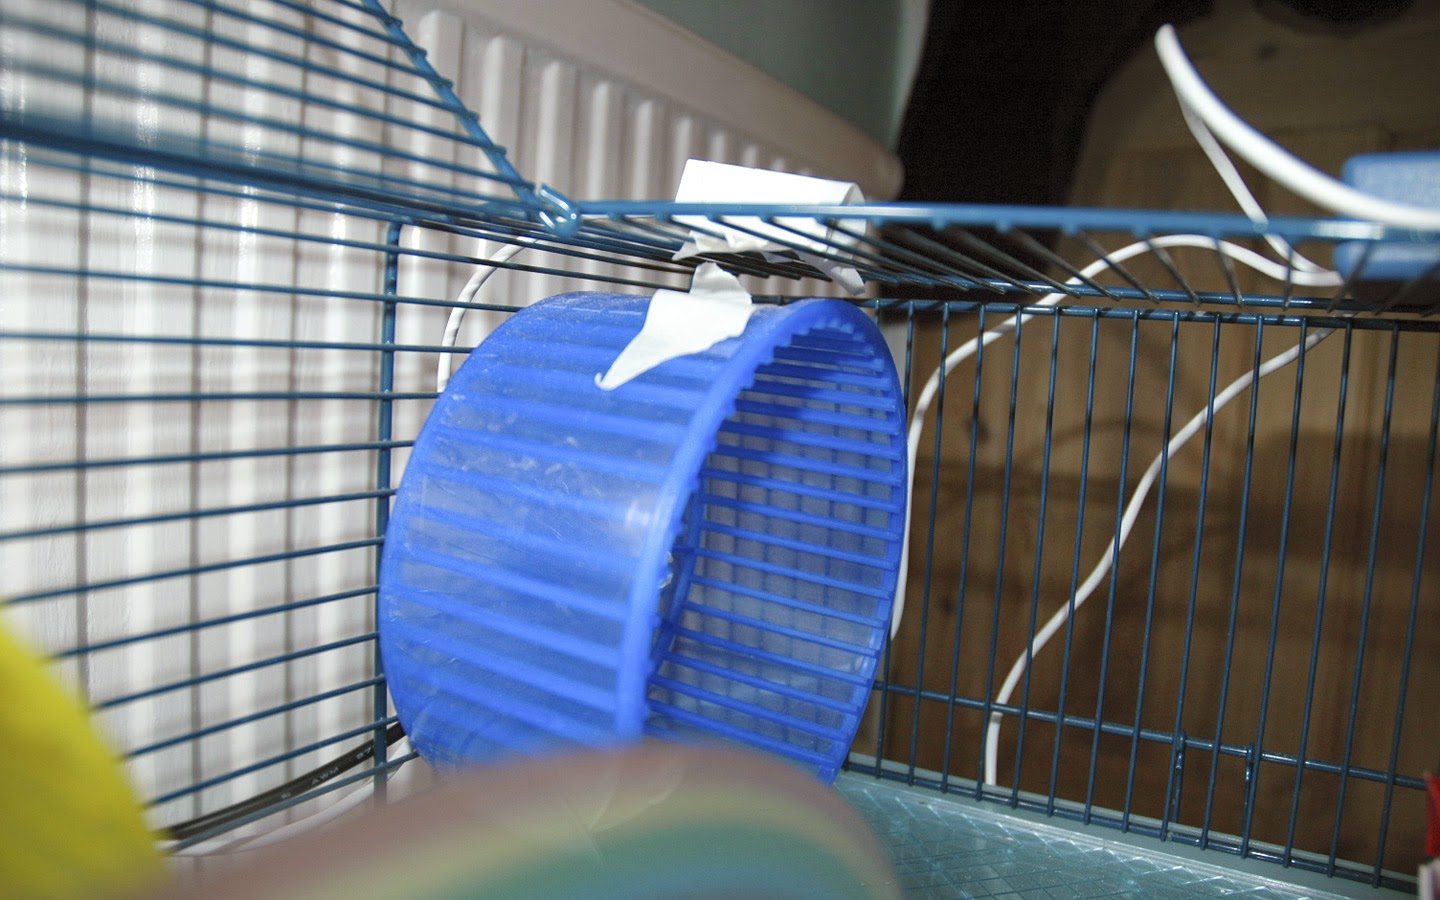 The image shows a close-up of a sensor device covered in silver duct tape, attached to the top bars of a blue hamster cage, possibly used for monitoring the hamster's wheel activity or behavior.